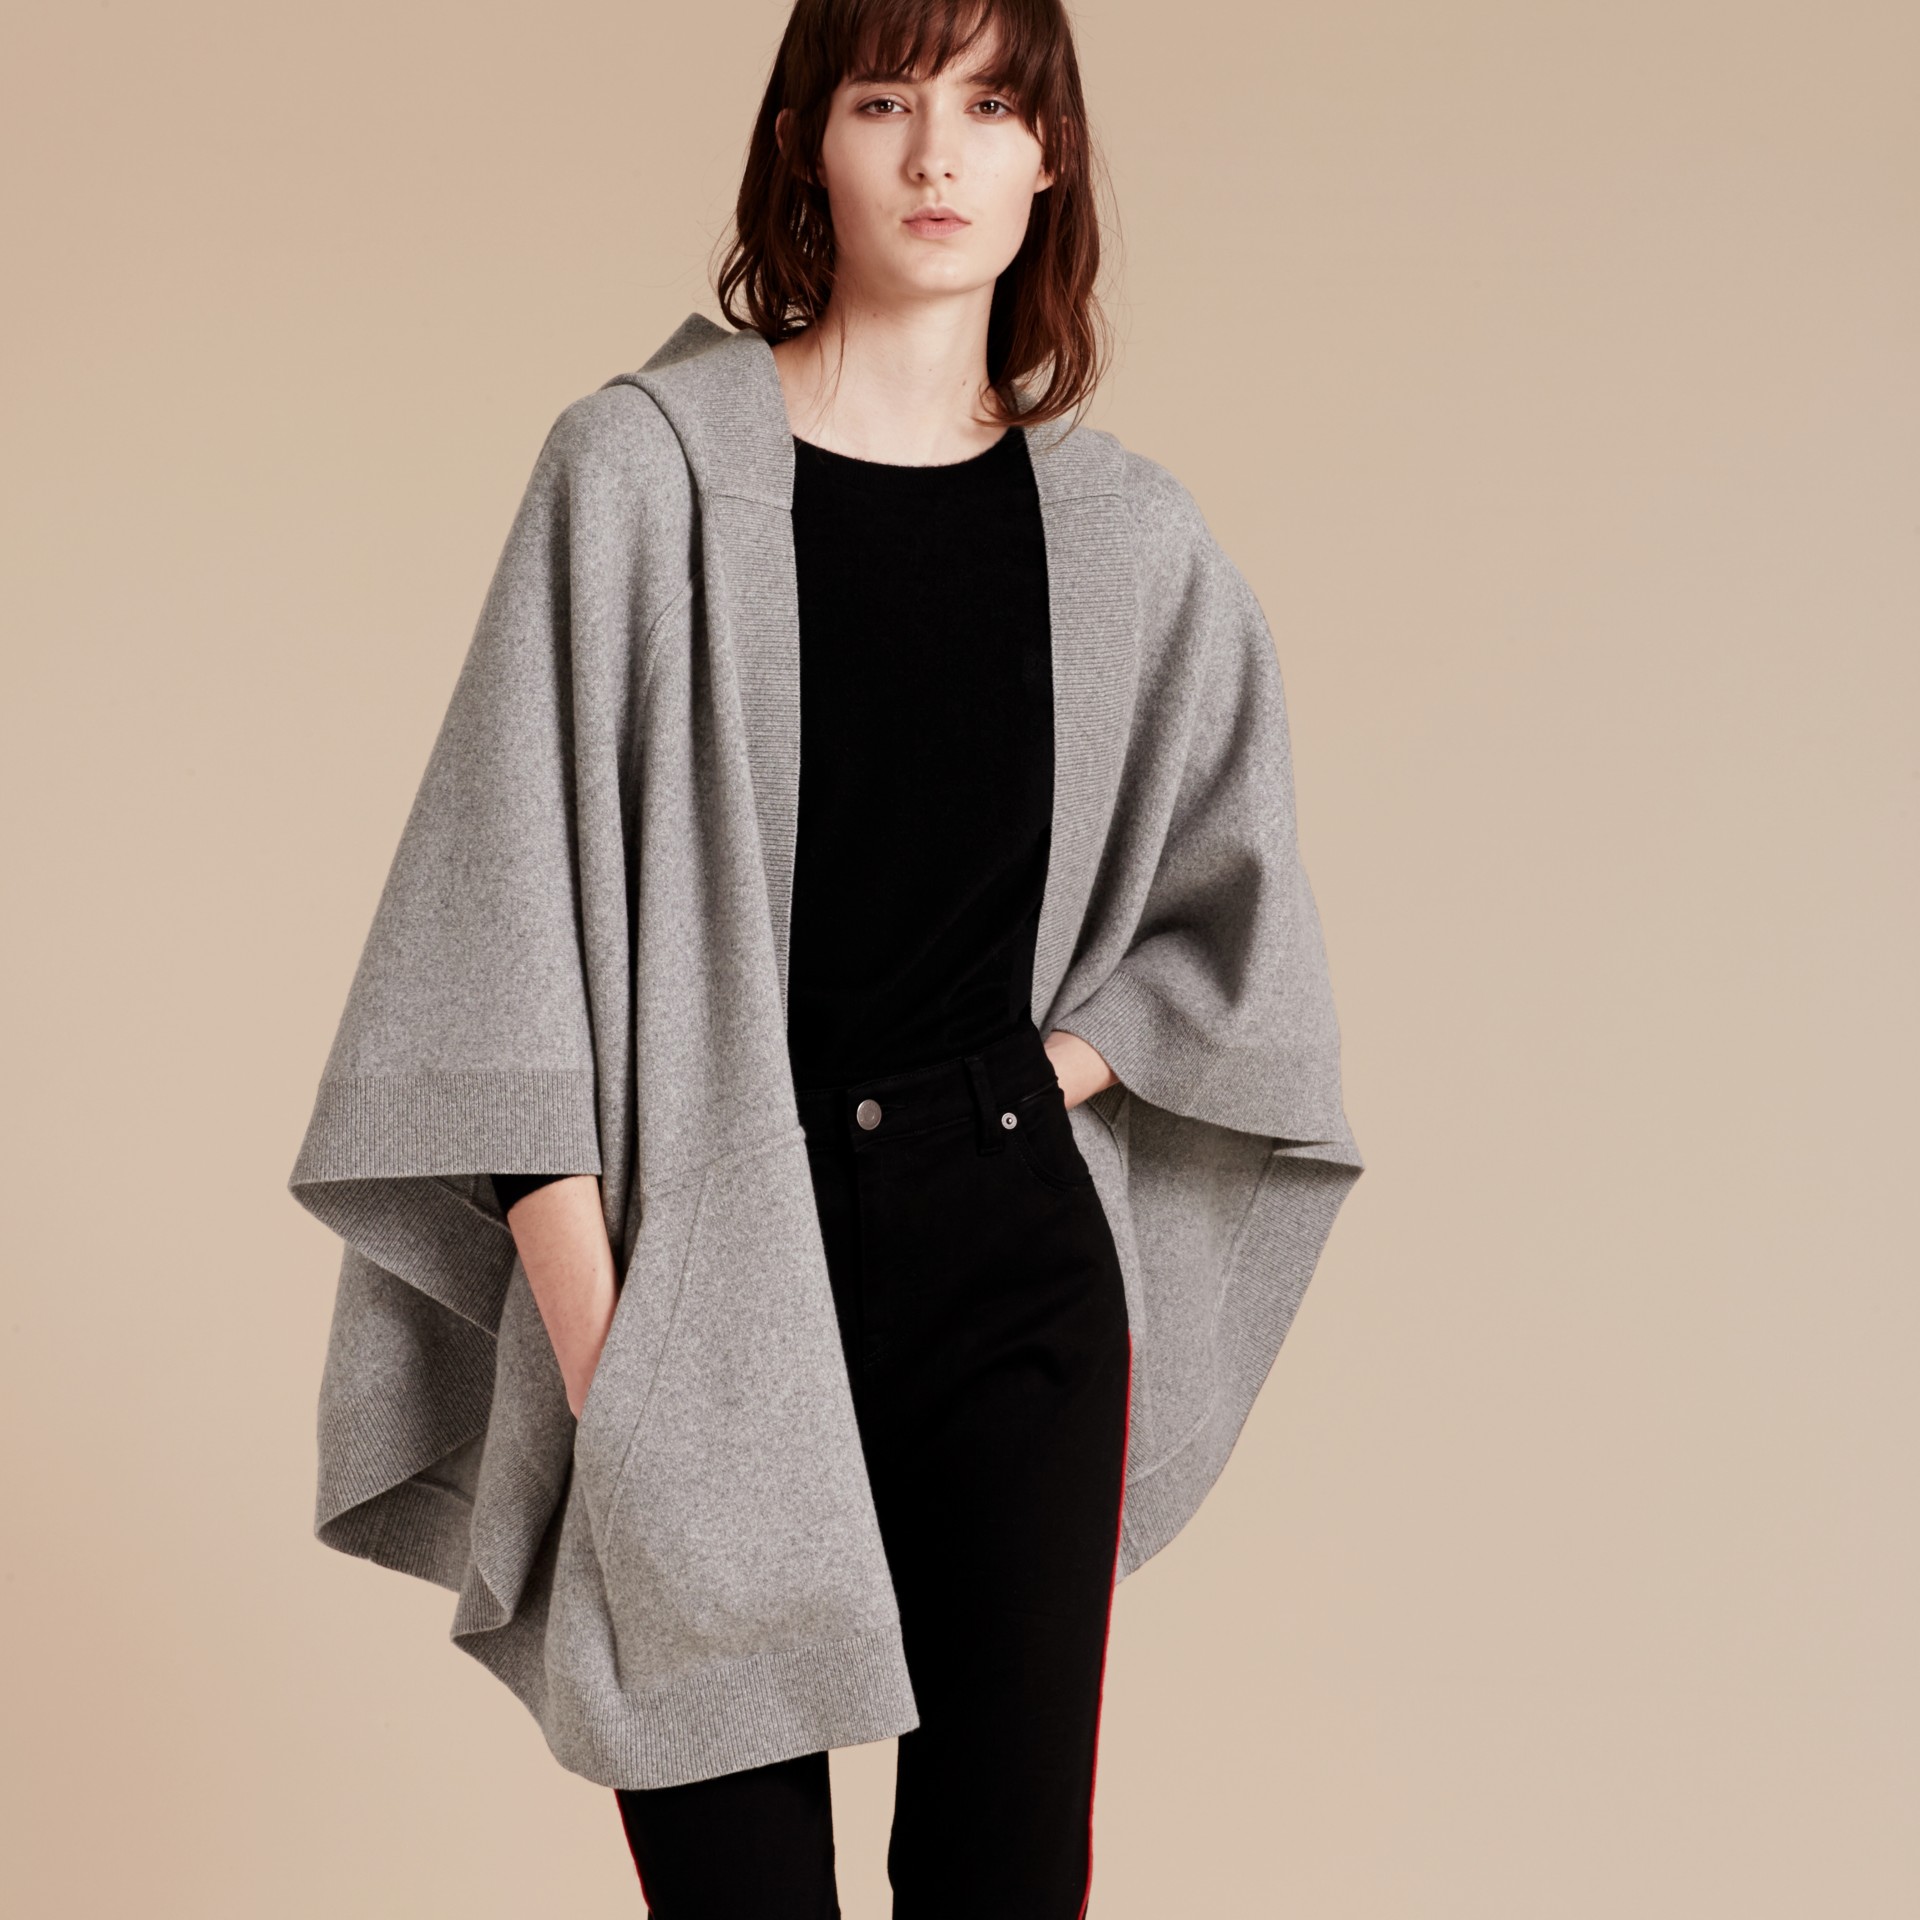 Wool Cashmere Blend Hooded Poncho in Mid Grey Melange - Women | Burberry